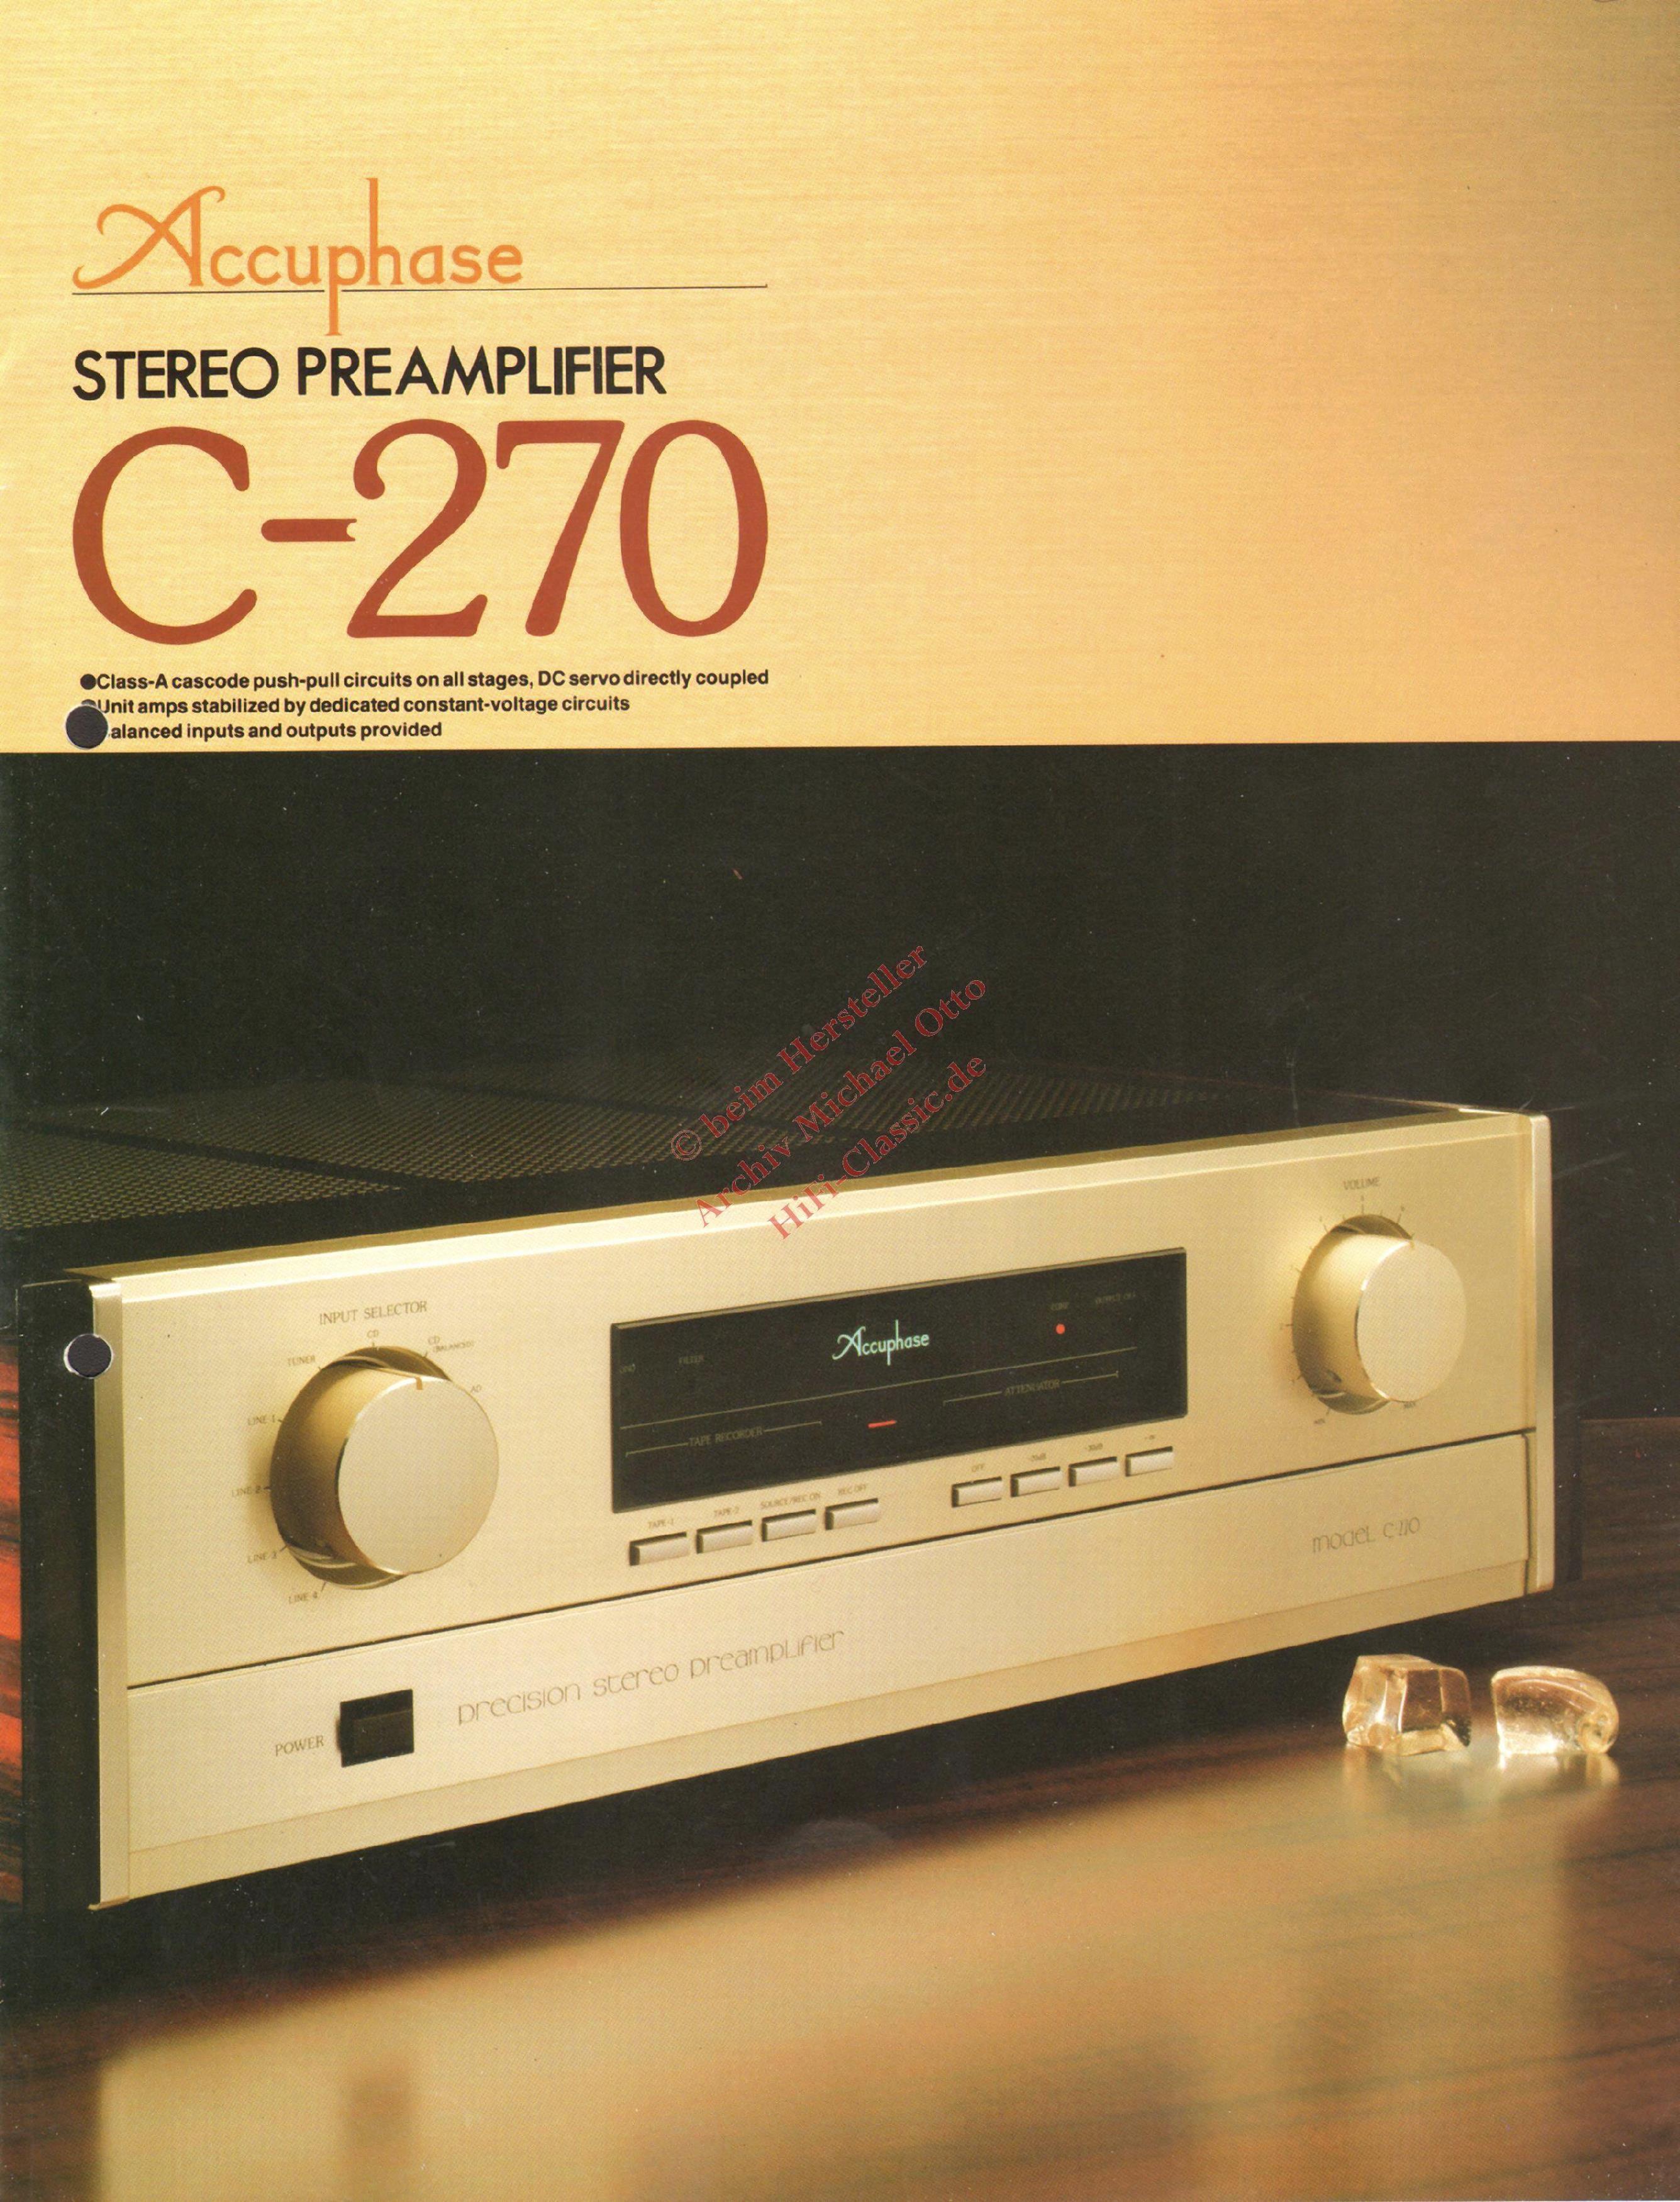 Accuphase C-270 US